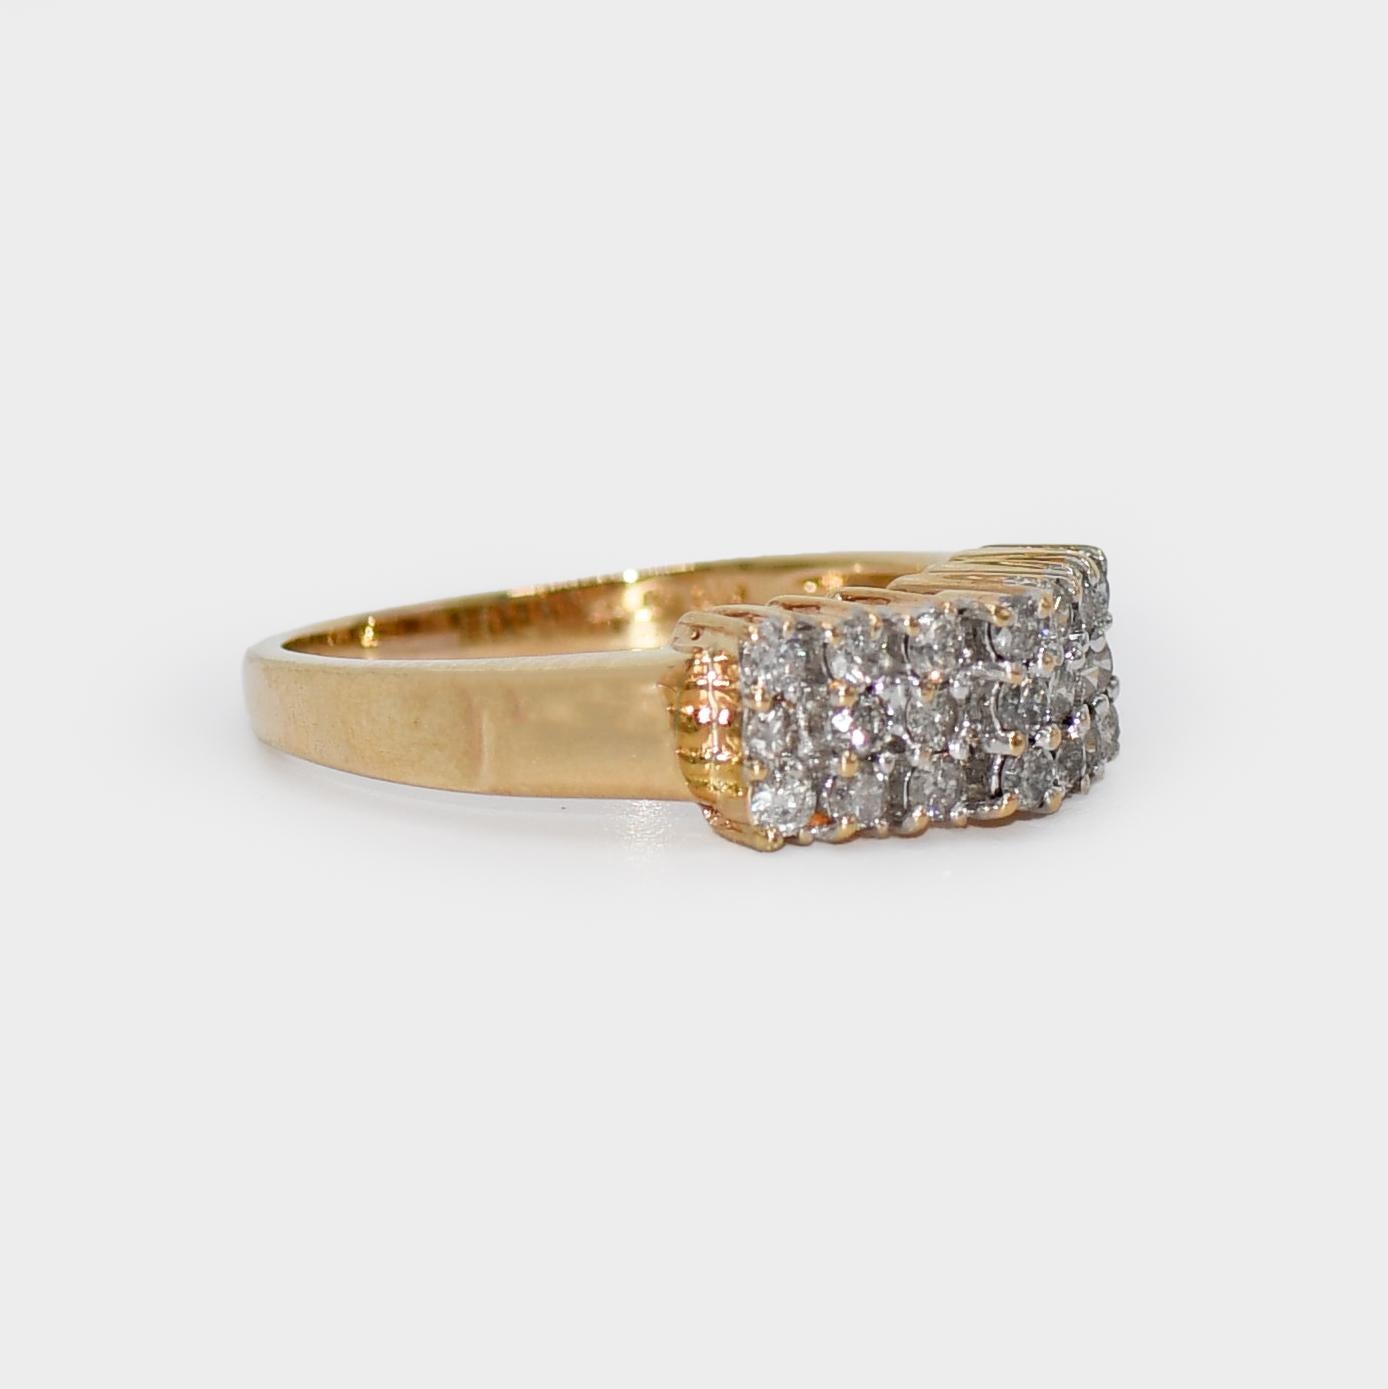 14k Yellow Gold Diamond Cluster Ring .35tdw, 4.4gr
14k Yellow Gold Diamond Cluster Ring.
The Diamonds are Round Brilliant Cuts, .35tdw. Clarity I1, Color L-M.
Stamped 14k, weighs 4.4gr.
Size 9 1/2.
Can be sized up or down one size for additional fee.